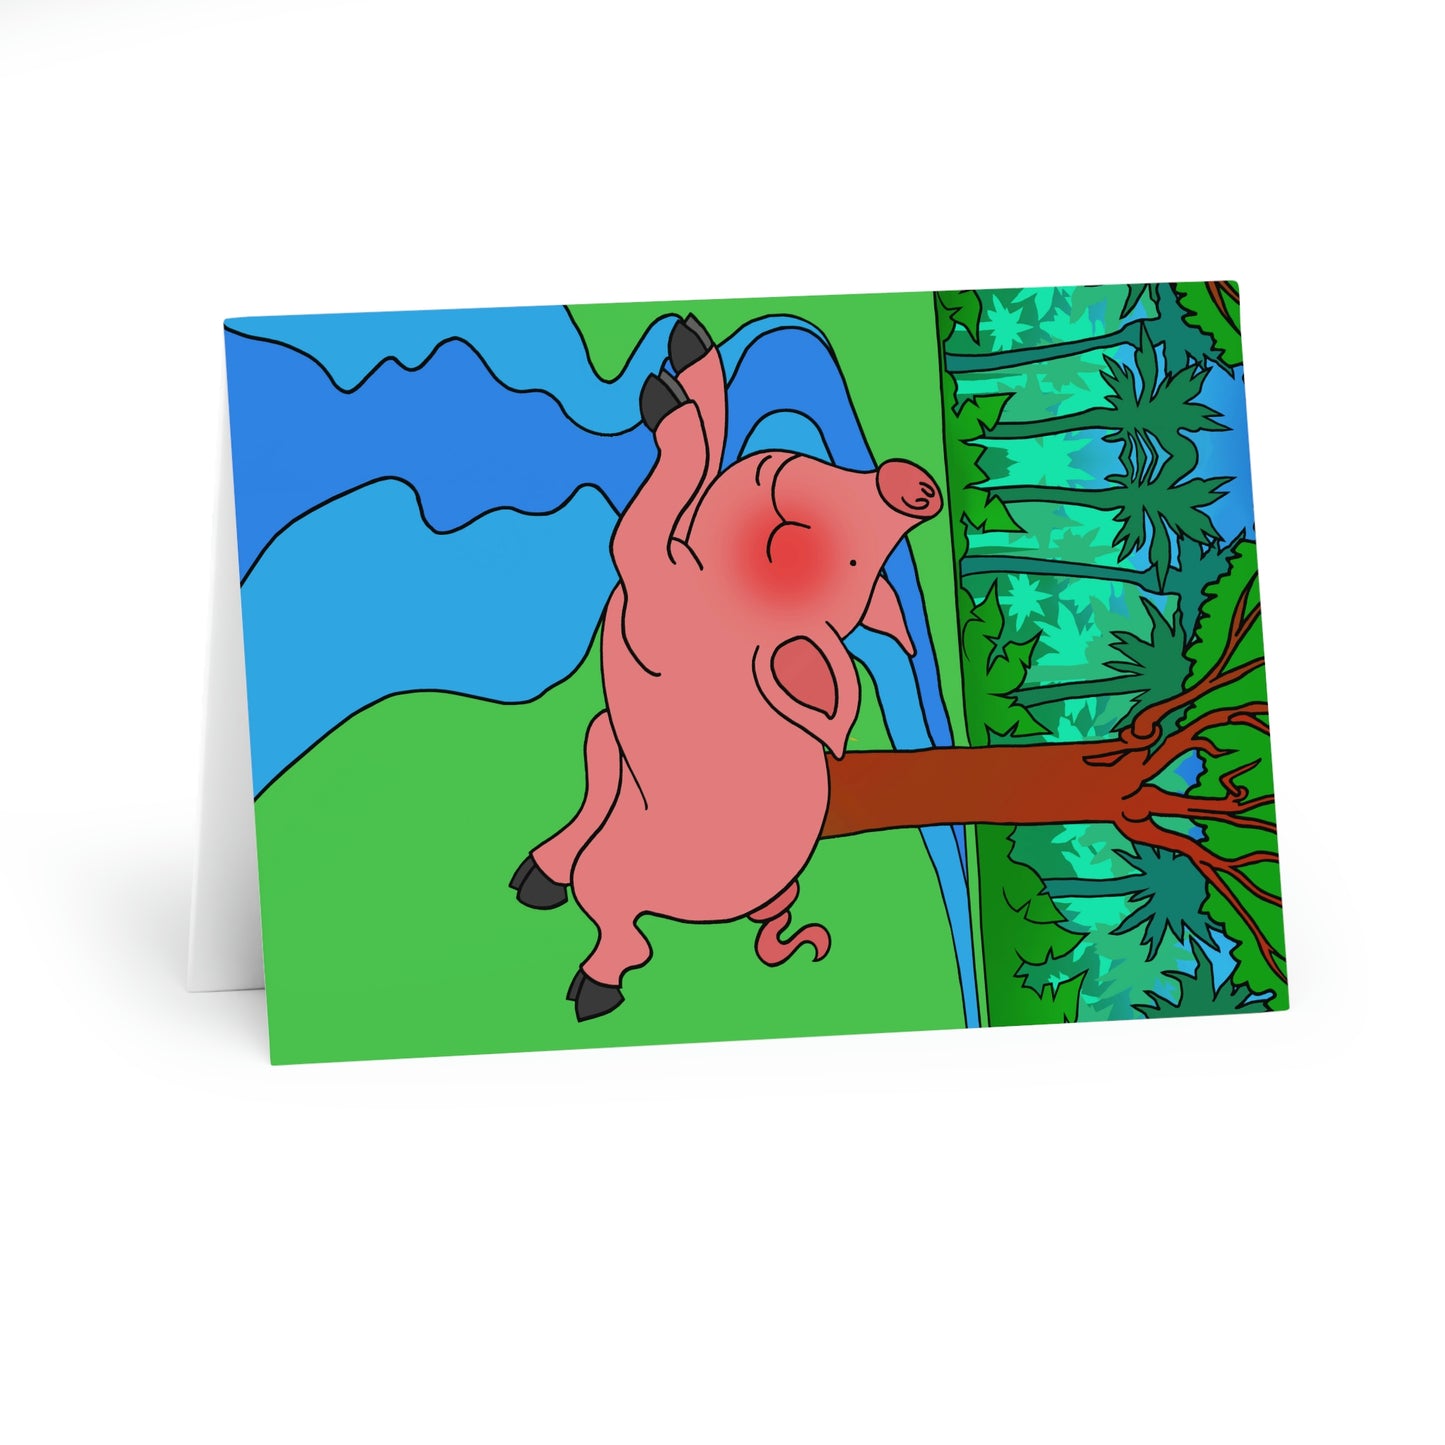 Anansi and the Market Pig! Greeting Cards (5 Pack)